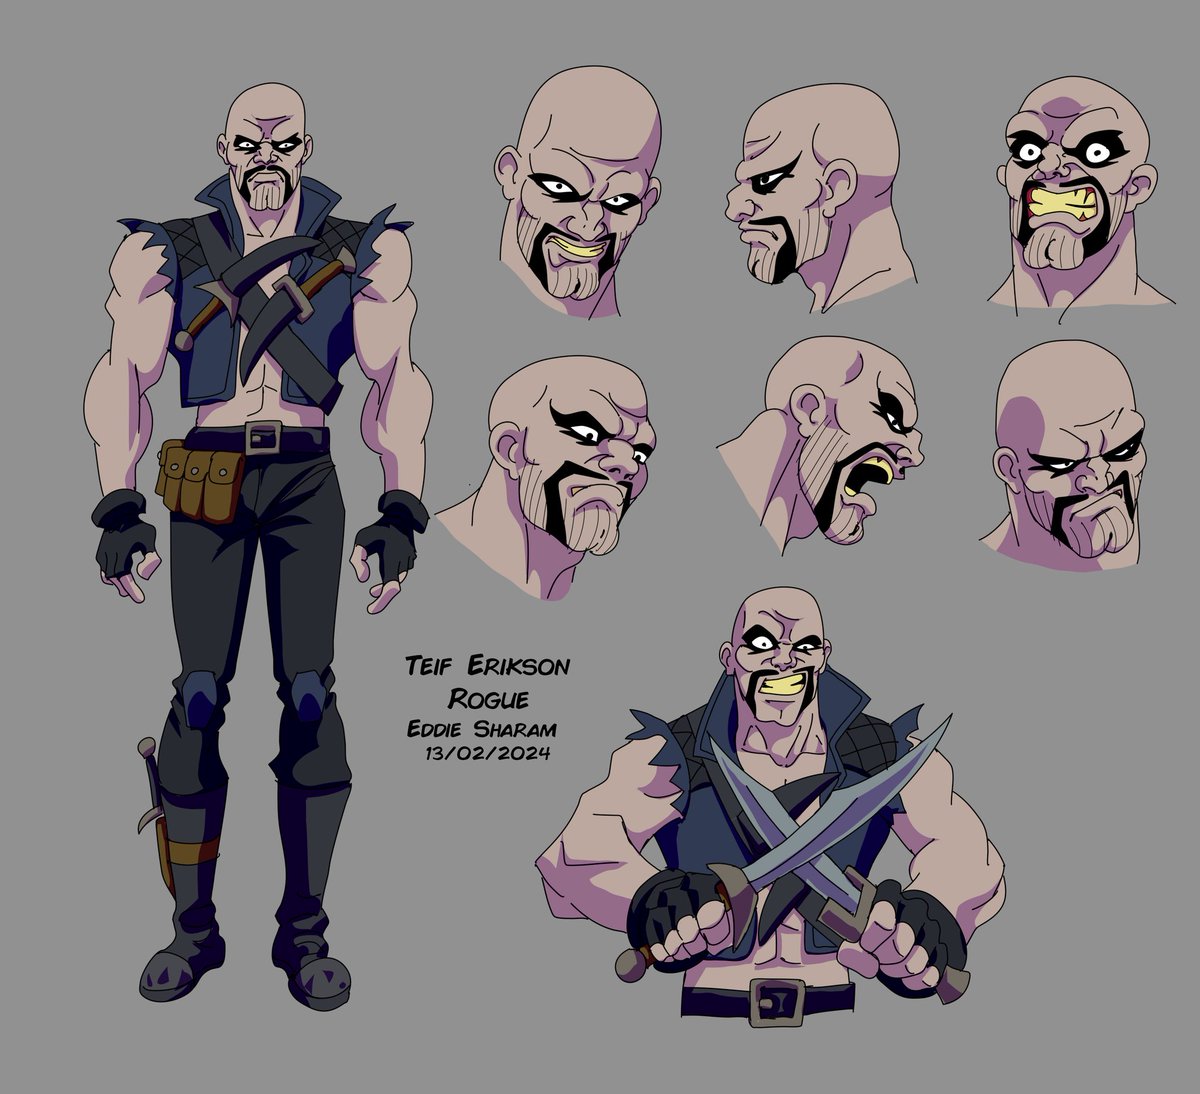 Character design for a 2d animation project. Channelling Jason Statham for this one! #characterdesign #anime #conceptart #animation #dnd #dungeonsanddragons